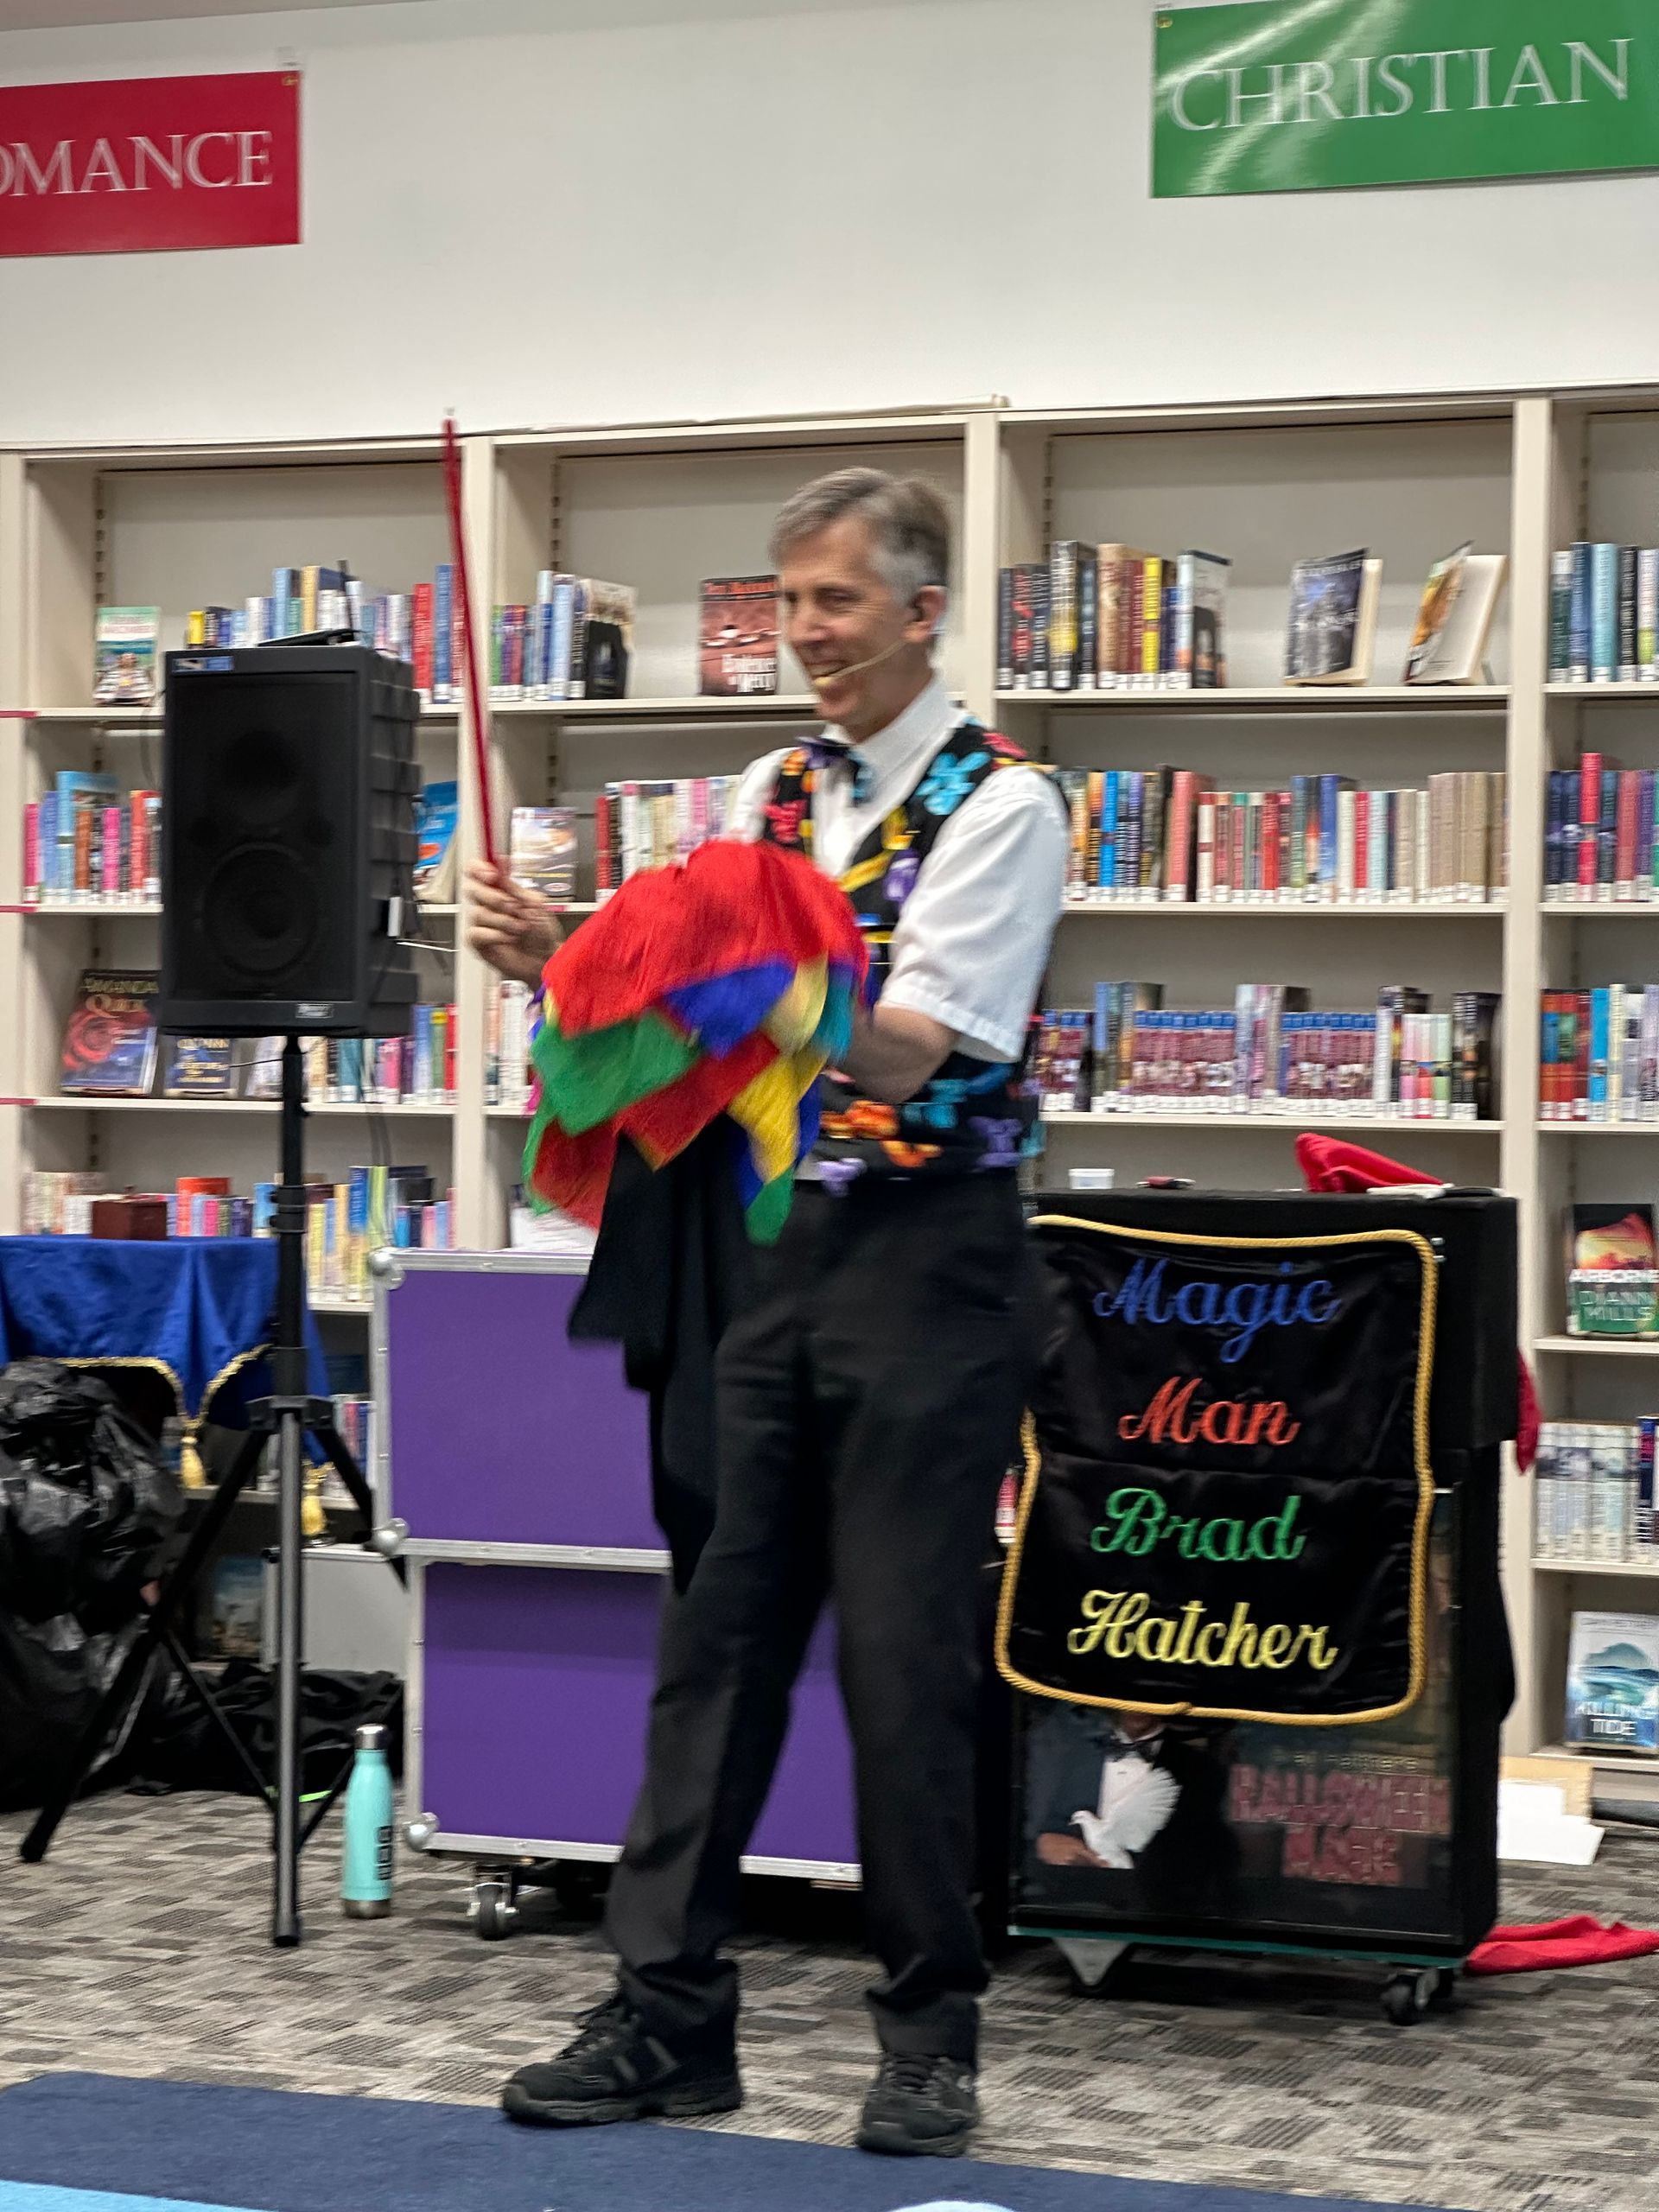 A man is making a balloon animal in a library.